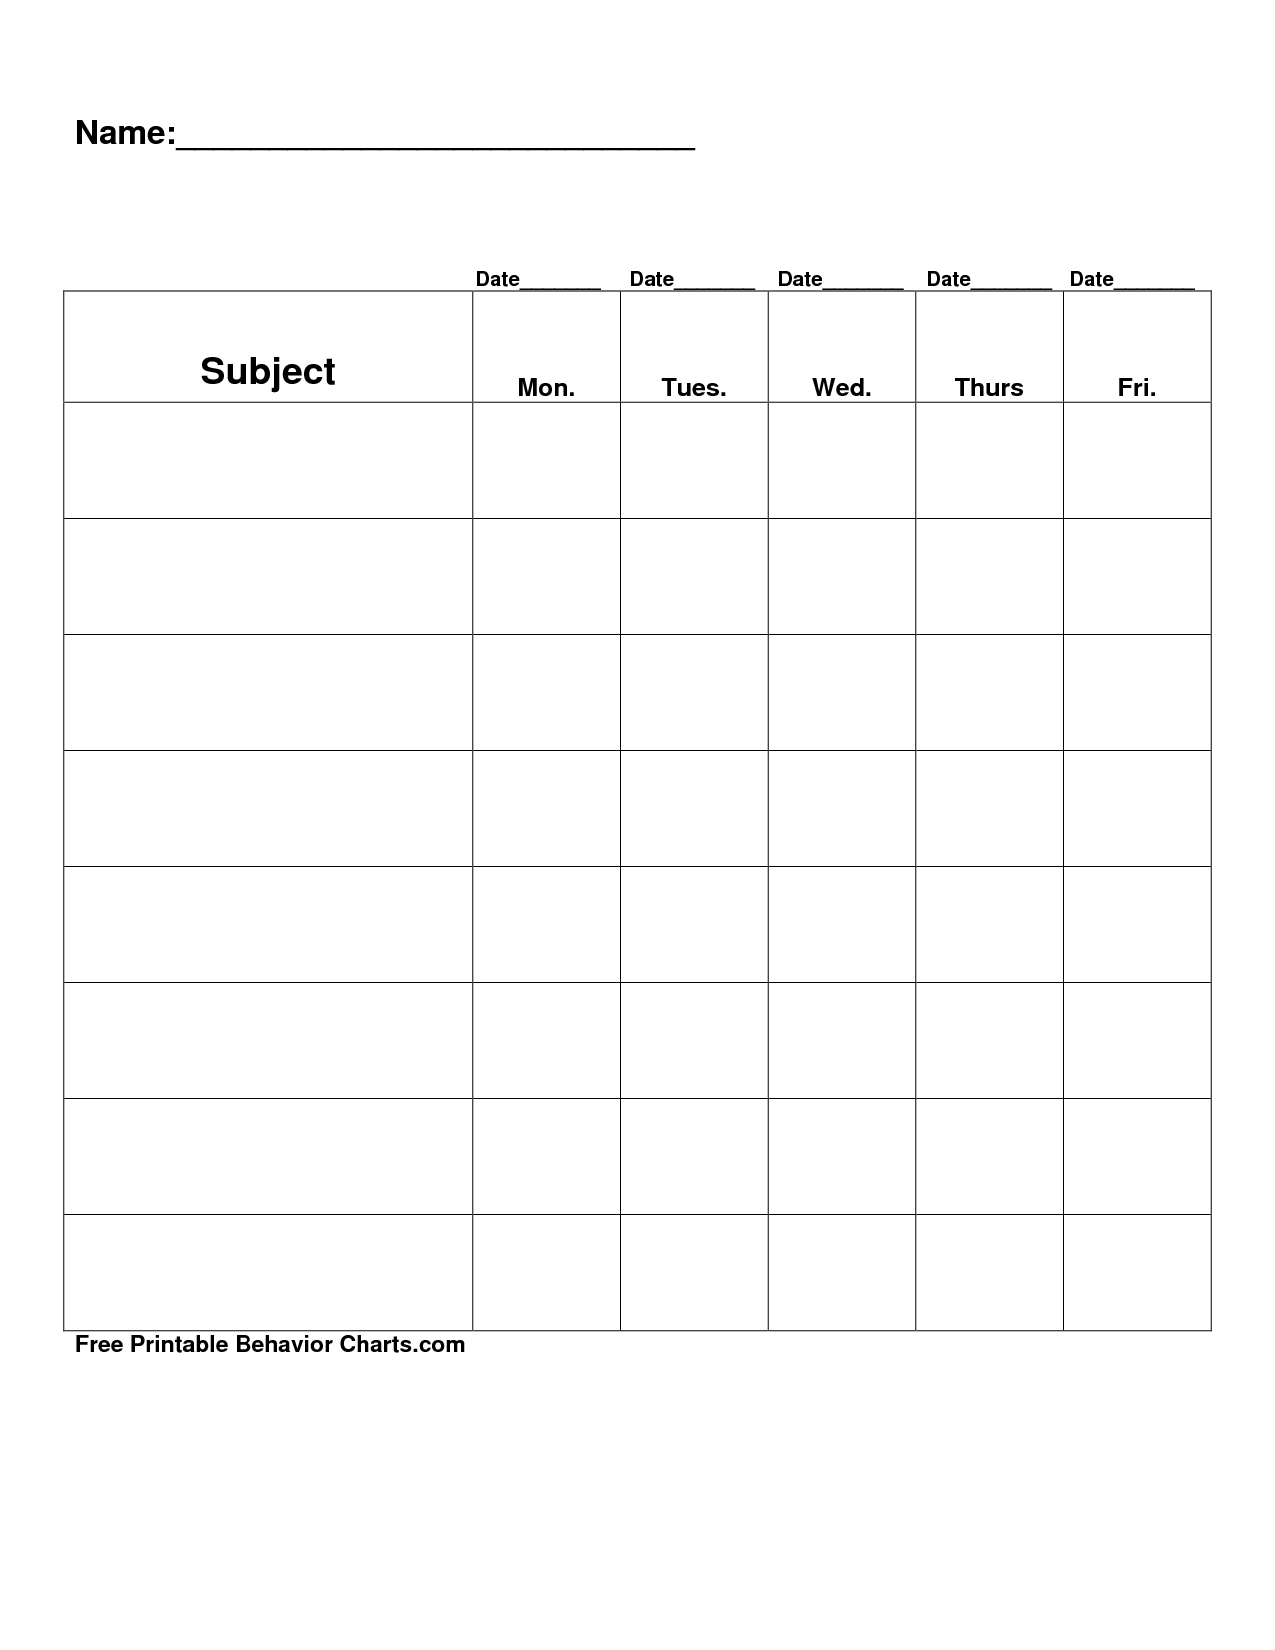 docstoc is closed | reward chart template, free printable